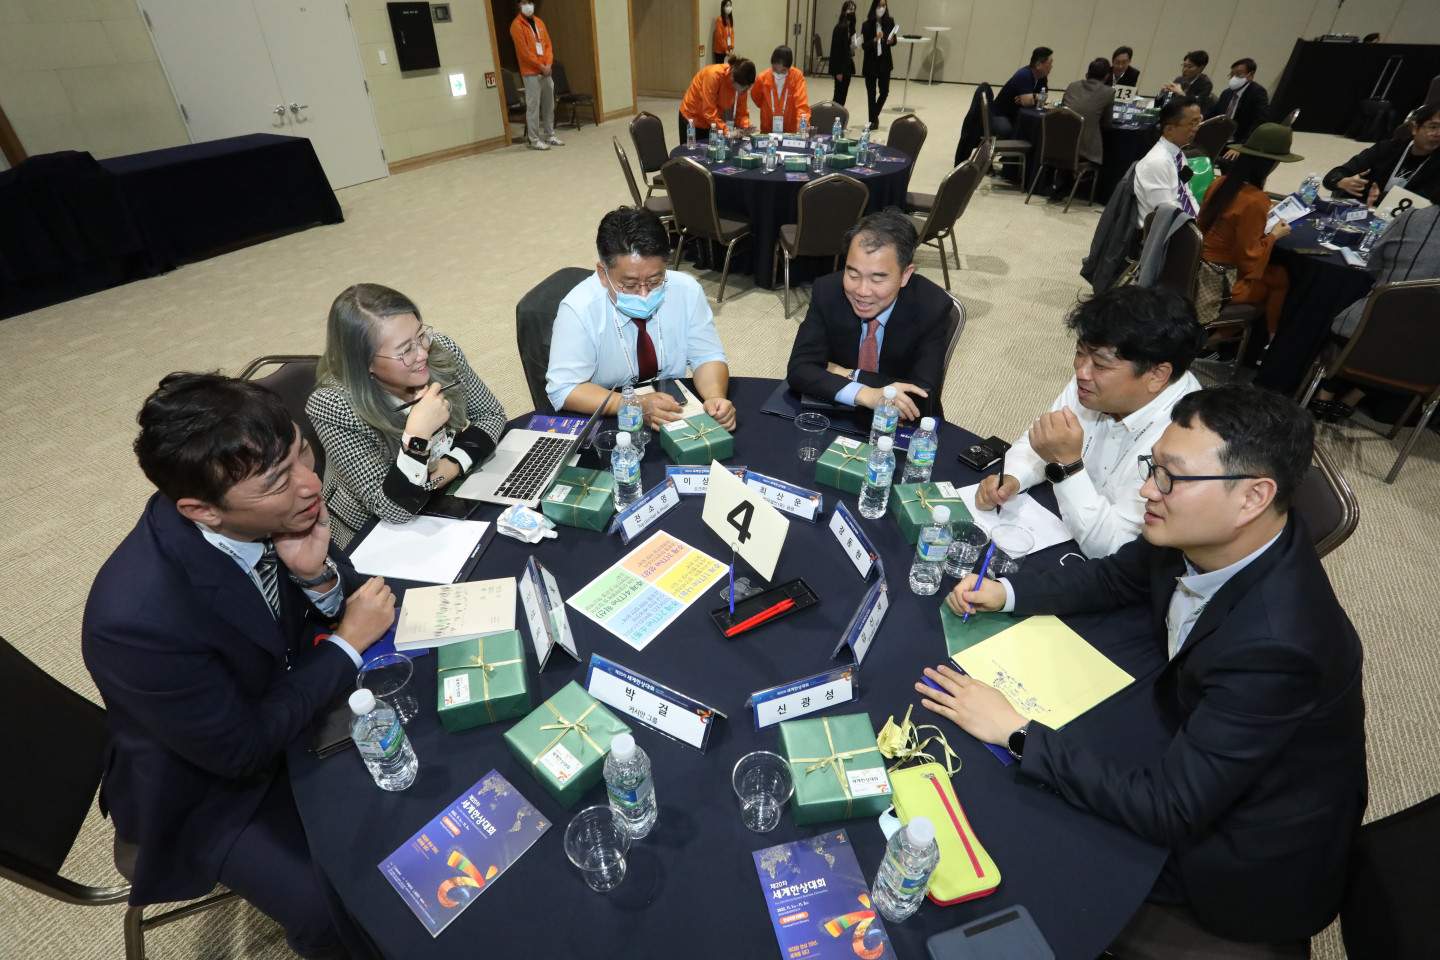 Korean businesspeople making connections and sharing their ideas at the forum